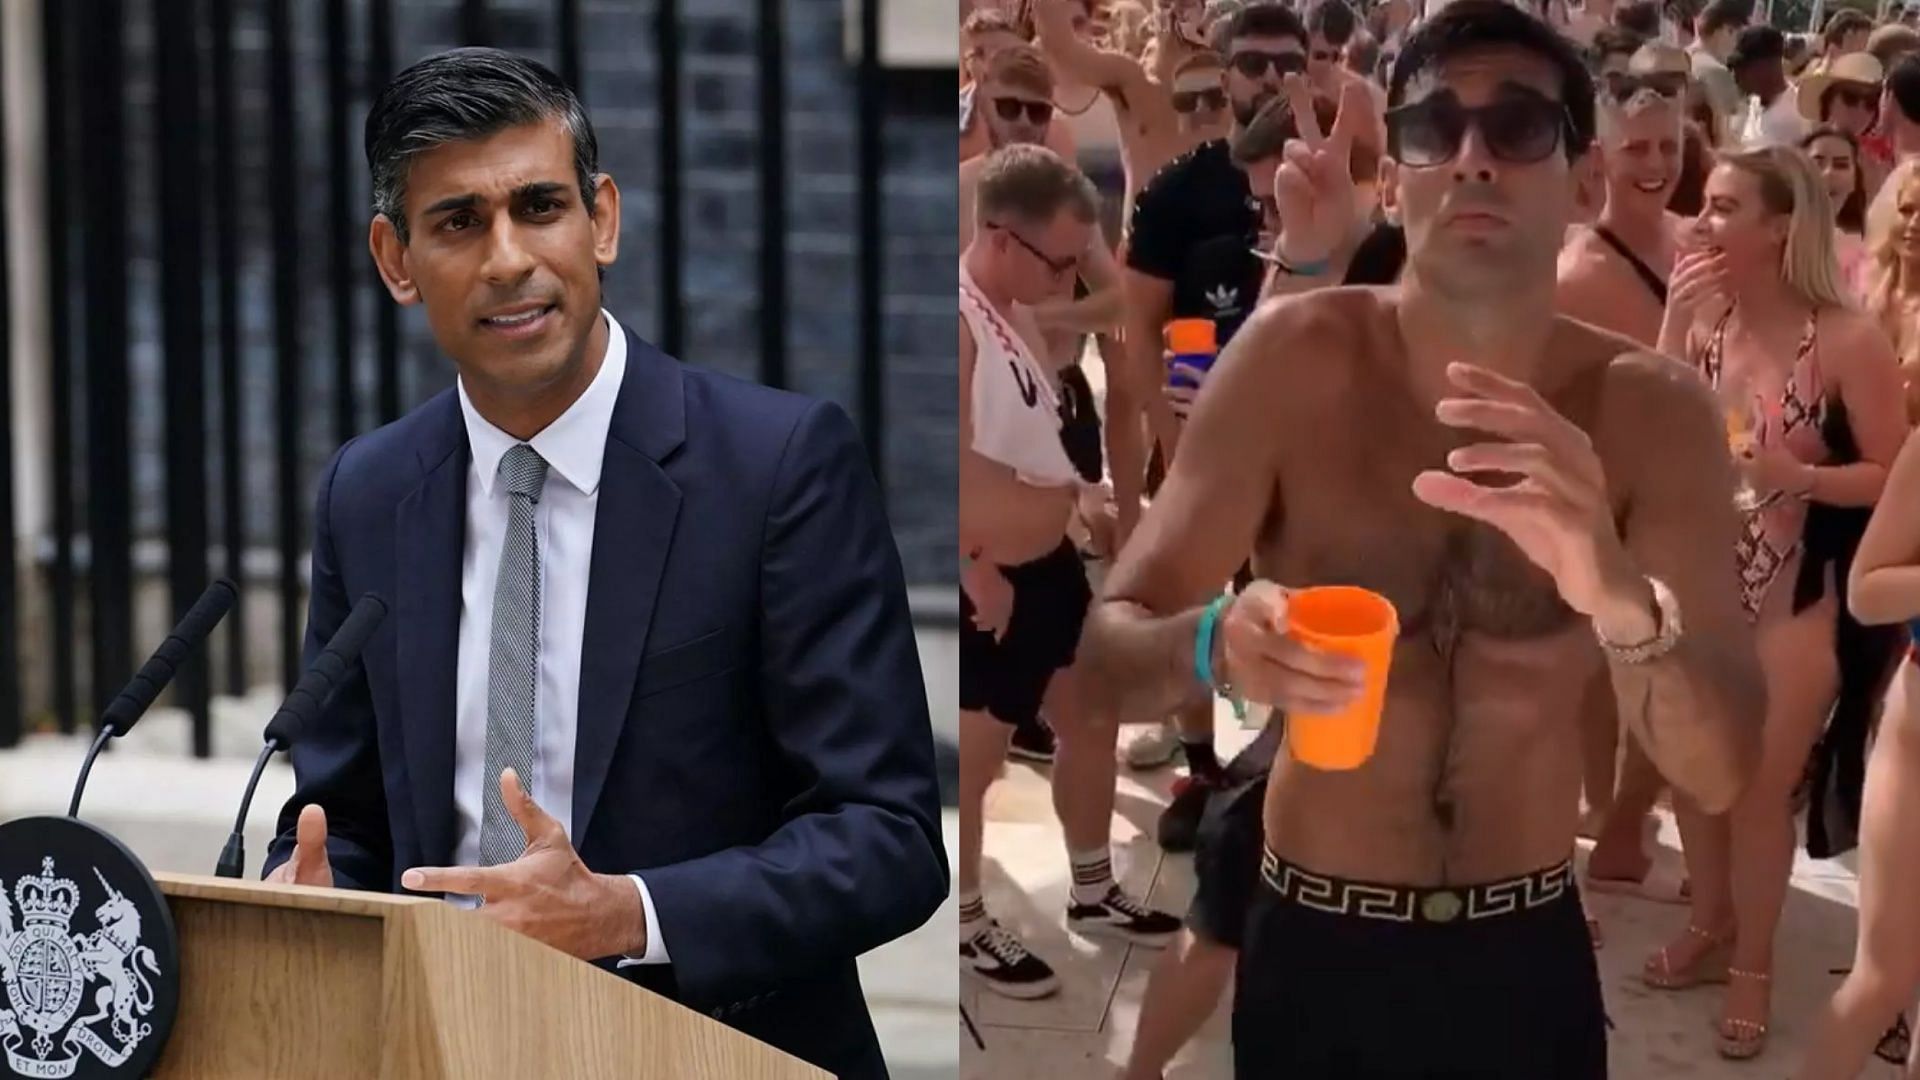 Viral claim about UK Prime Minister Rishi Sunak seen dancing shirtless in Ibiza has been debunked. (Image via Getty Images, Instagram/@waynelineker)